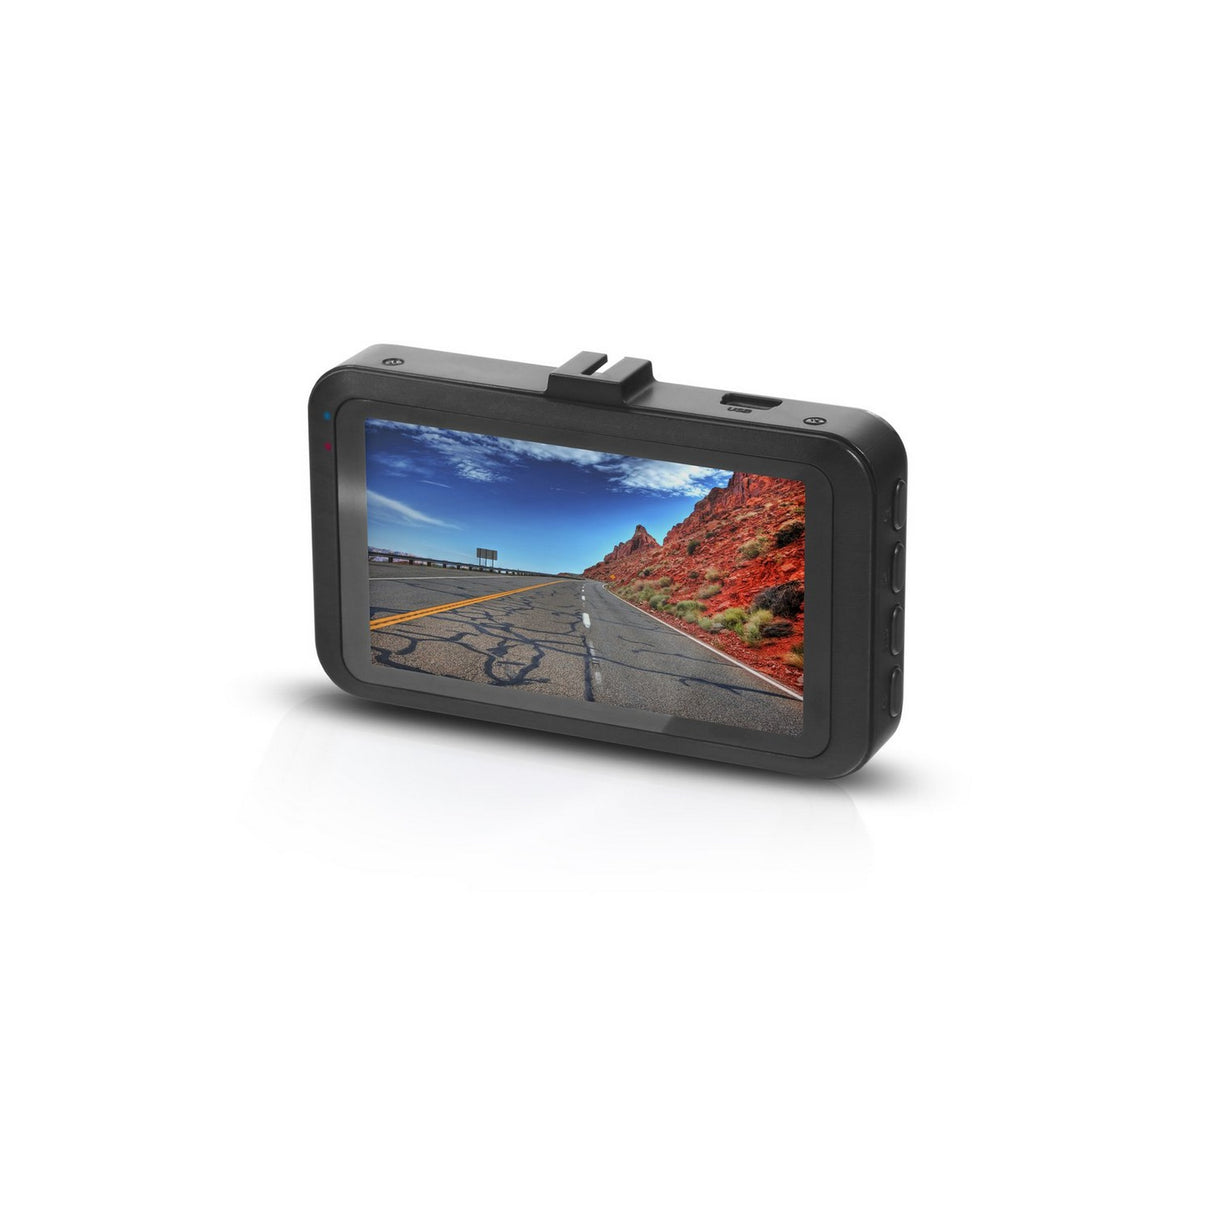 Minolta MNCD330 1080p Car Camcorder with 3.0-Inch LCD Monitor, Red